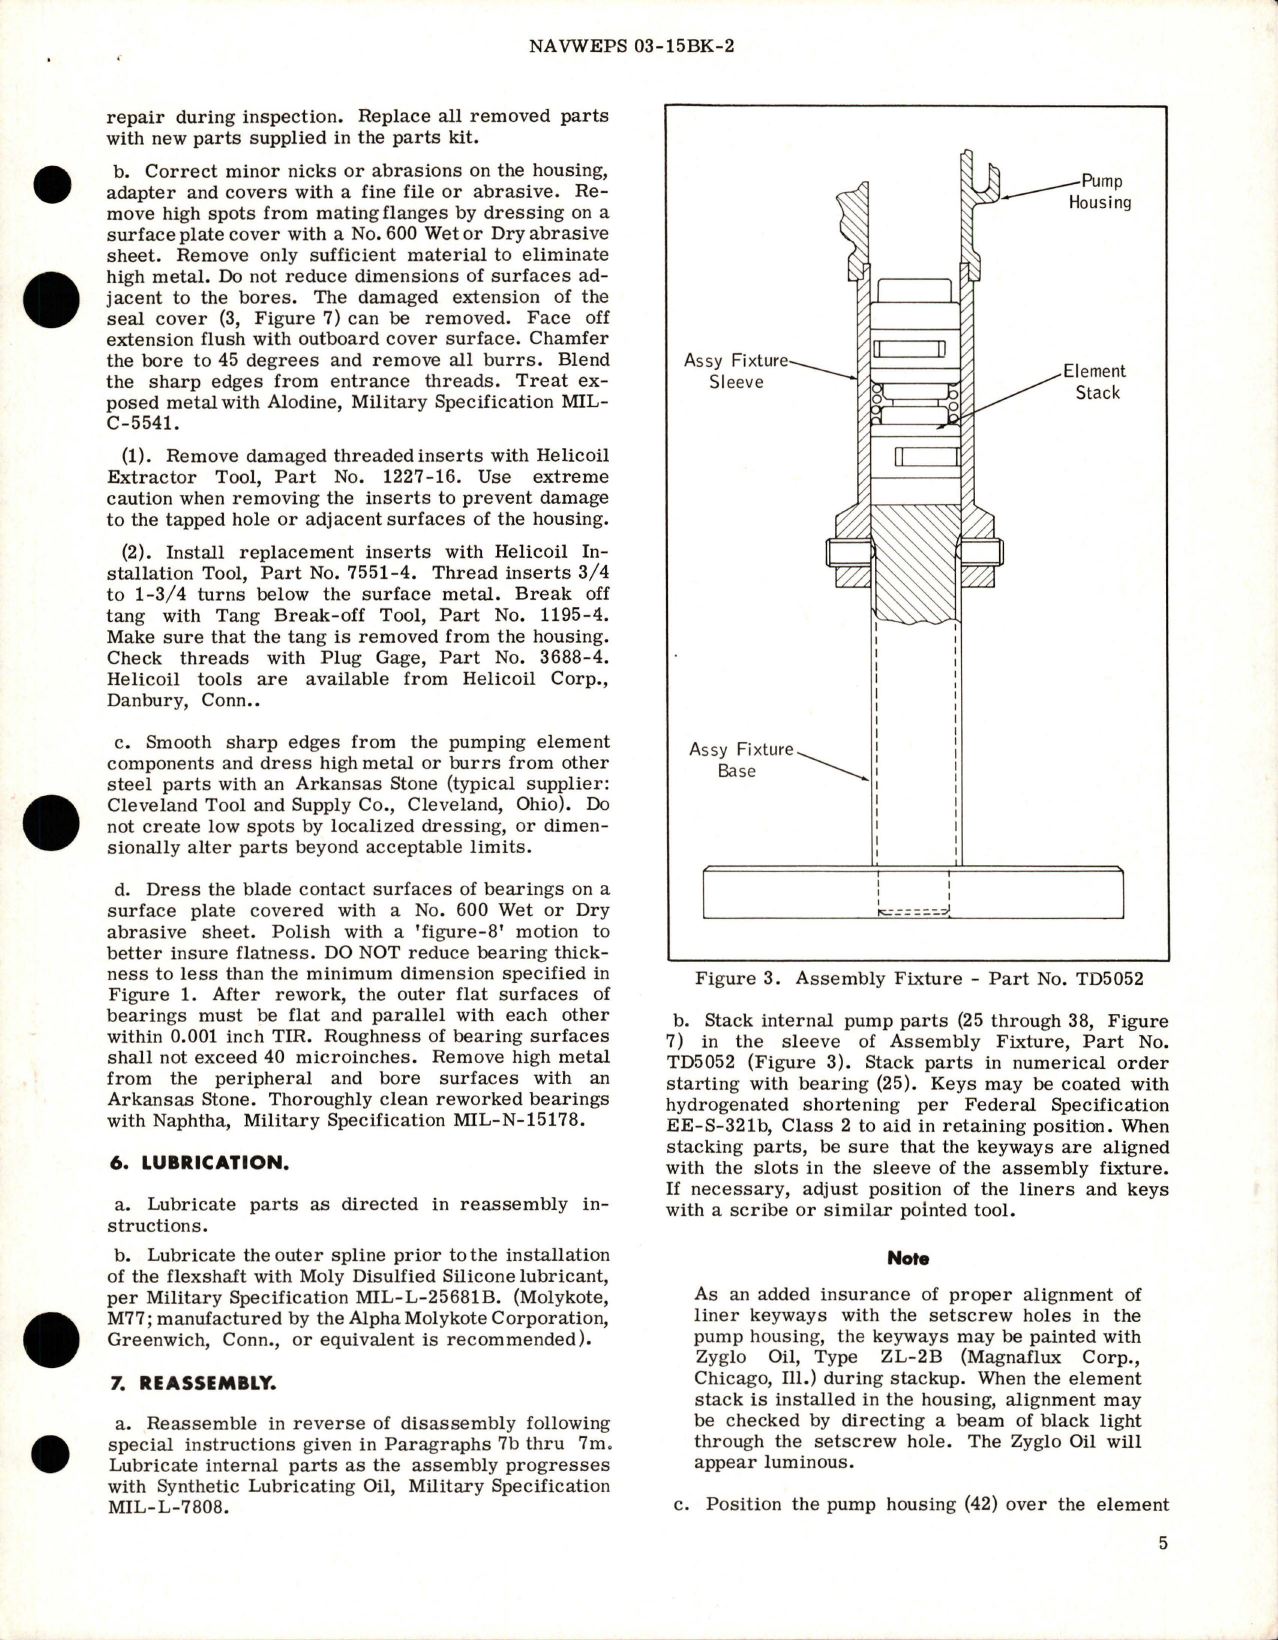 Sample page 7 from AirCorps Library document: Overhaul Instructions with Parts for Power Driven Rotary Pump - Model RR17800,